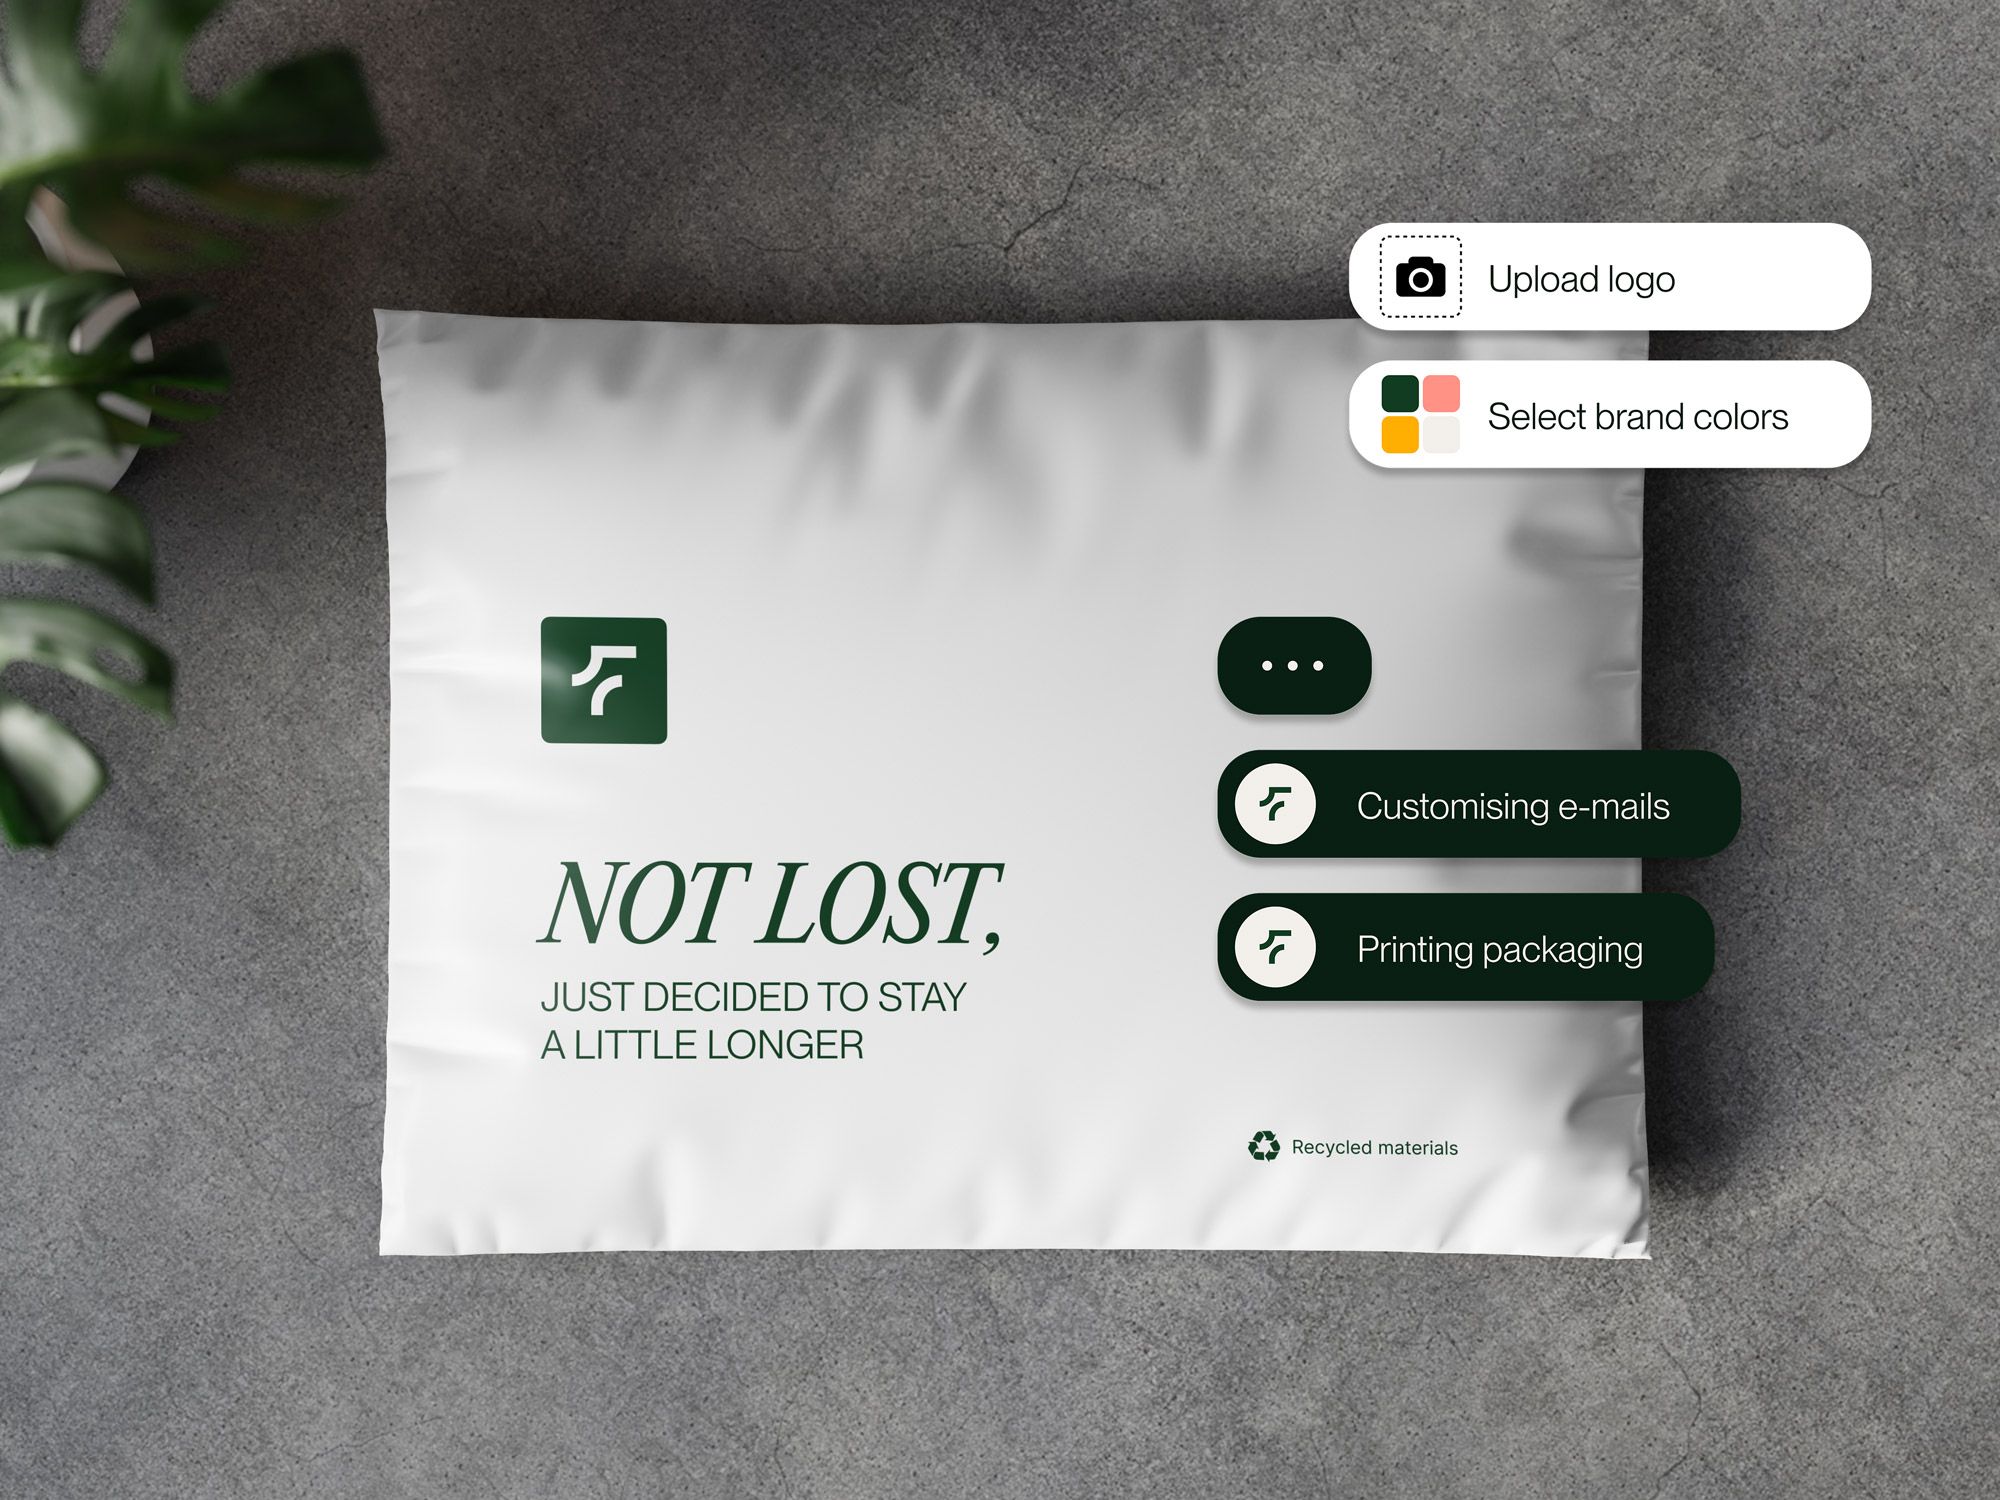 Faundit creates custom branded packaging for your lost and found items